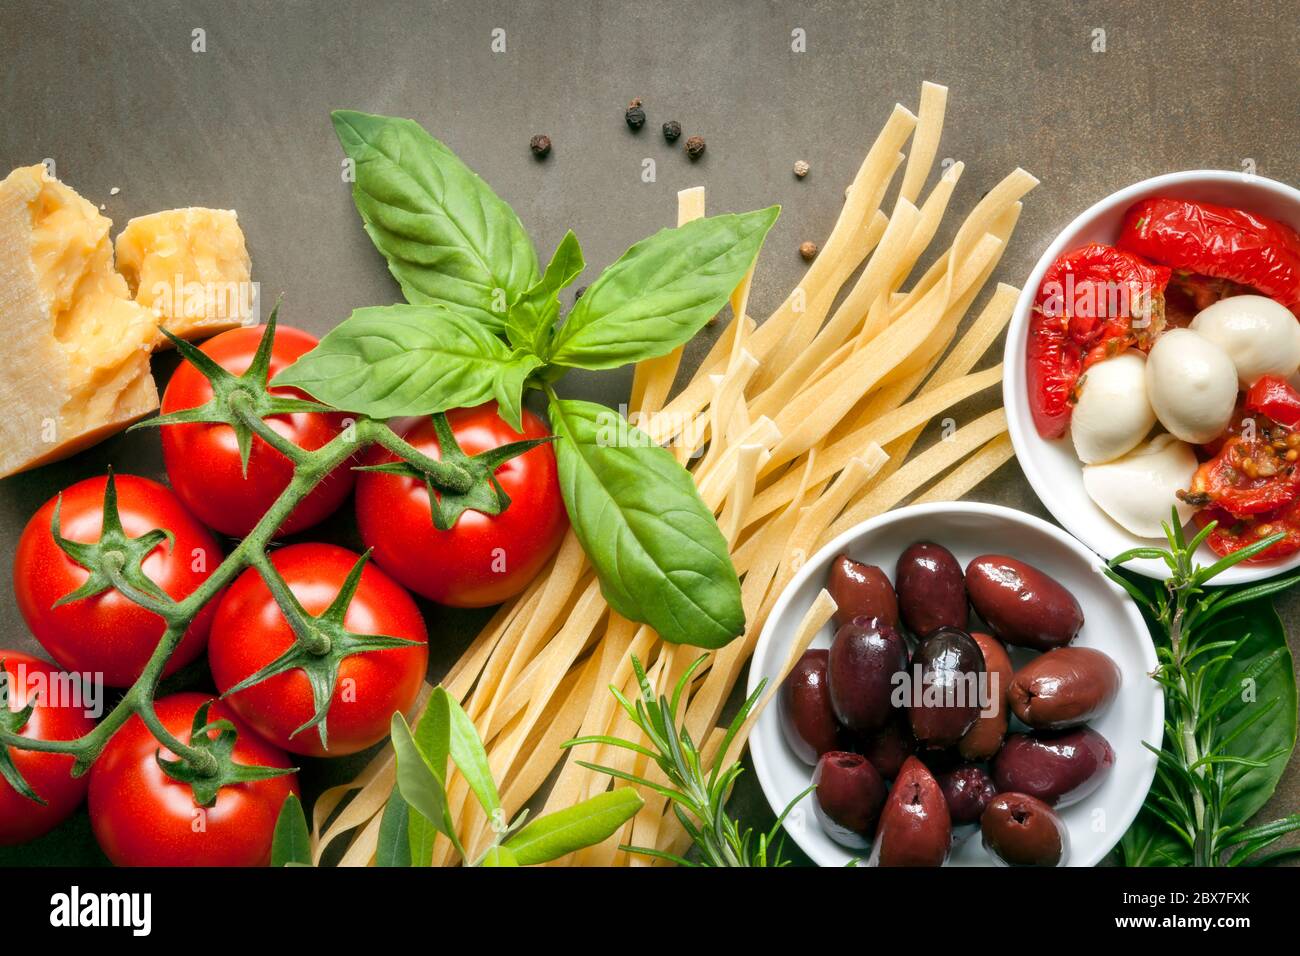 Italian food background, over slate.  Top view. Variety of ingredients, including pasta, tomatoes, basil, olives, parmesan, mozzarella, garlic, and he Stock Photo